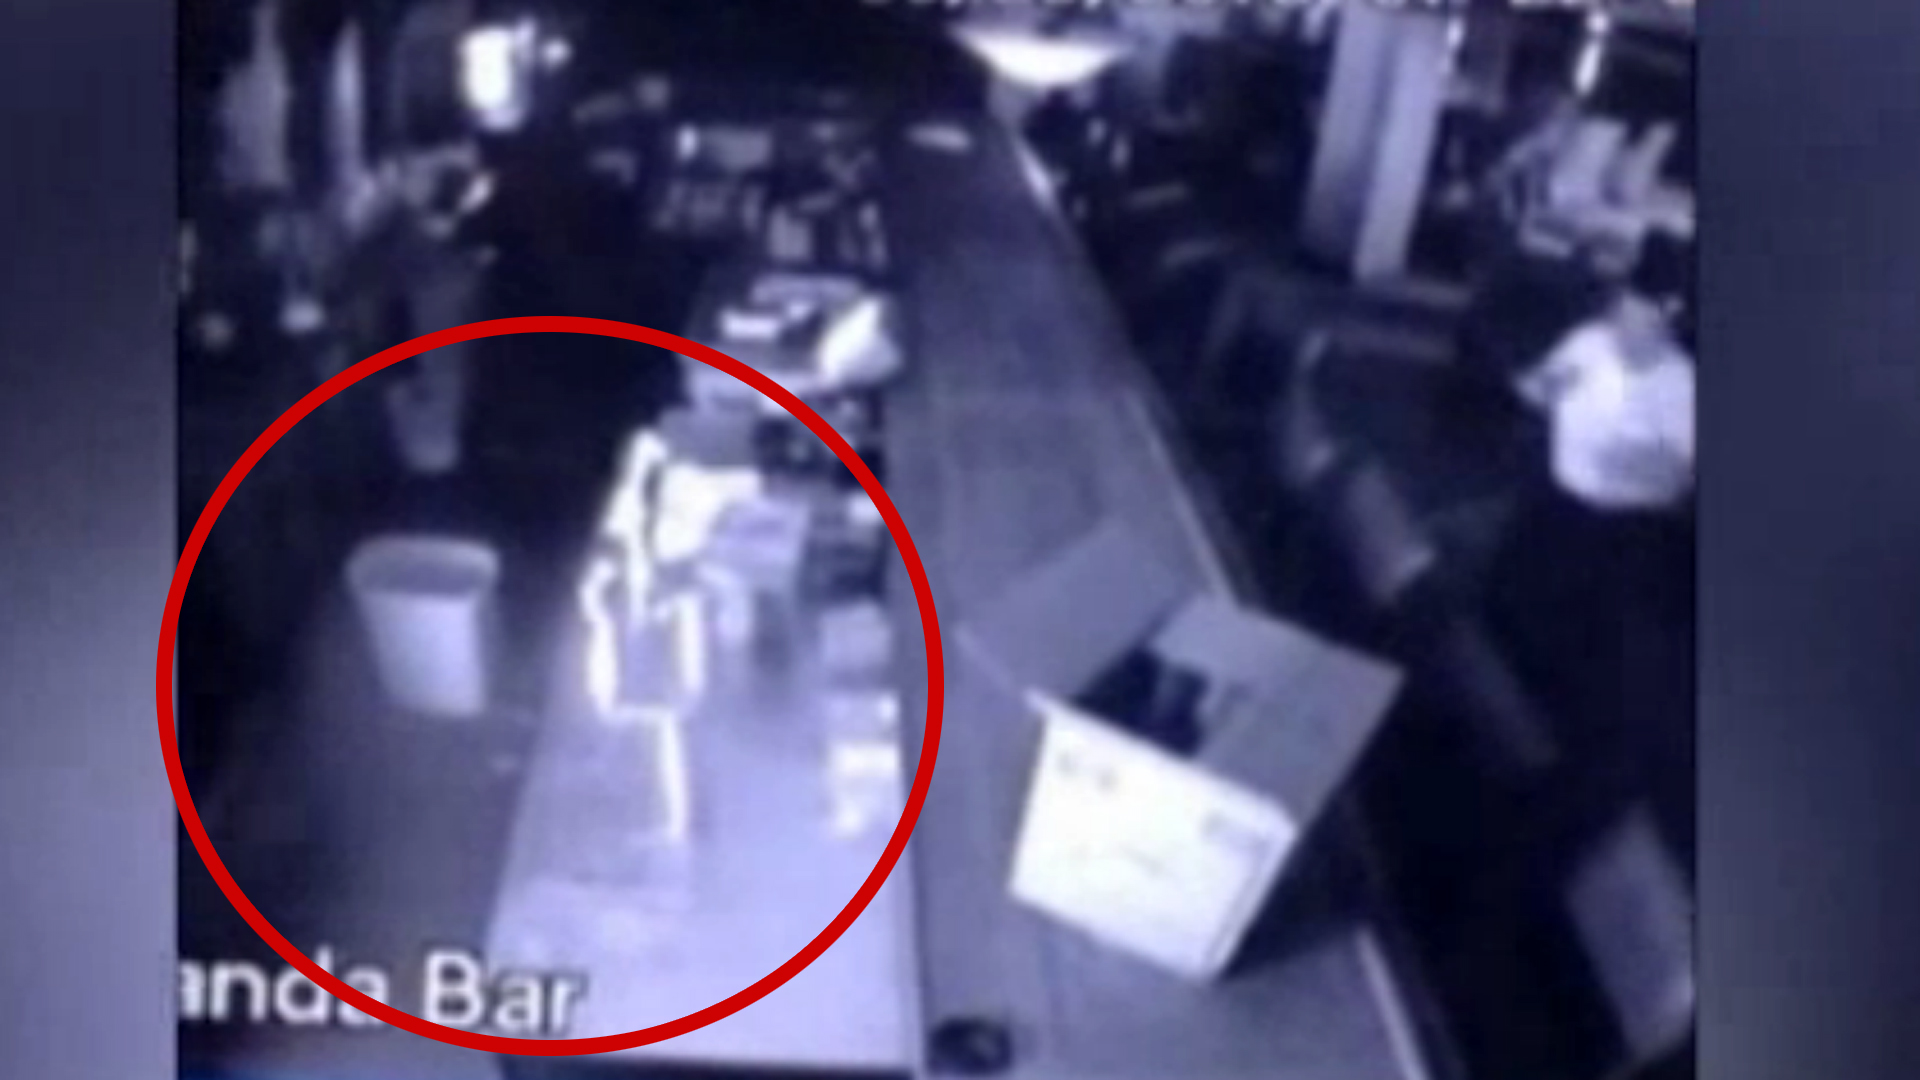 Does Surveillance Video Show Ghost Haunting A Bar